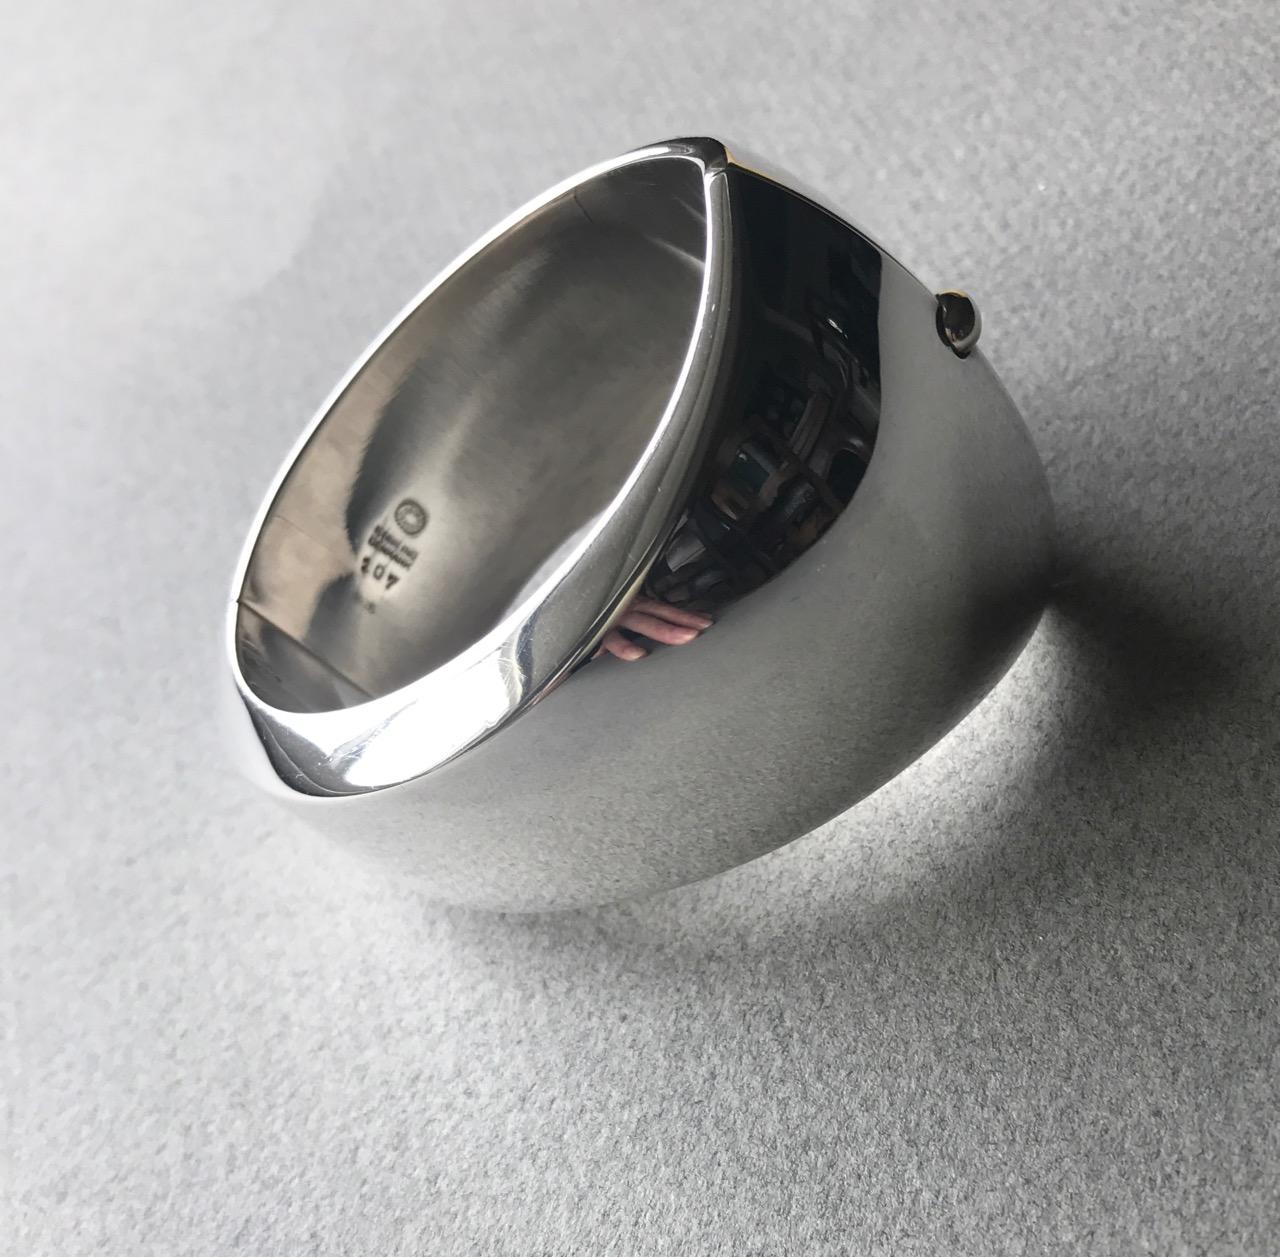 Georg Jensen Sterling Silver Modernist Cuff by Nanna Ditzel, No. 107.
Georg Jensen Sterling Silver Earrings No. 92
This iconic modernist design is a true statement piece and very comfortable to wear.  
Dimensions: 2.25